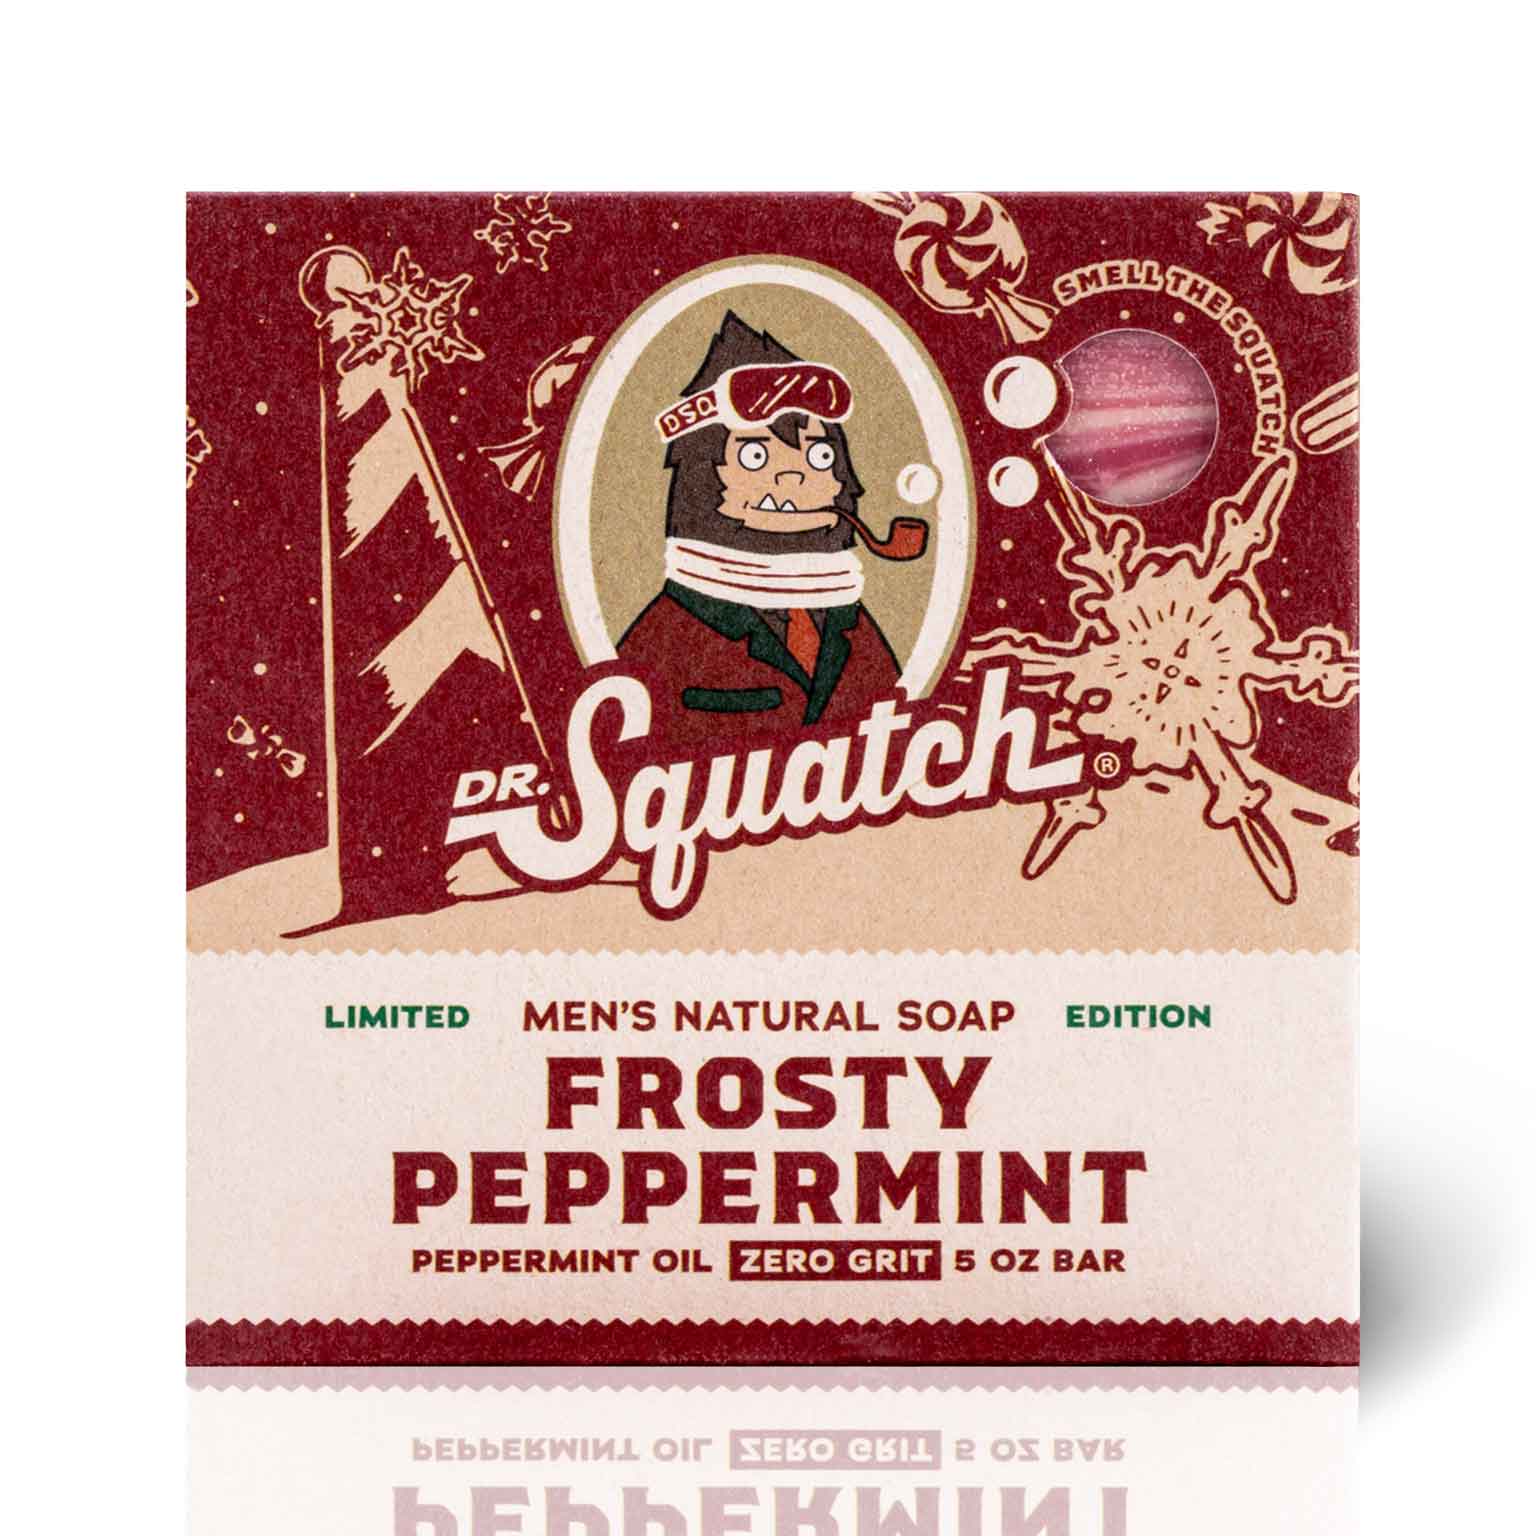 Dr. Squatch Limited Edition Frosty Peppermint 1 Bar Men's Natural Soap  Christmas